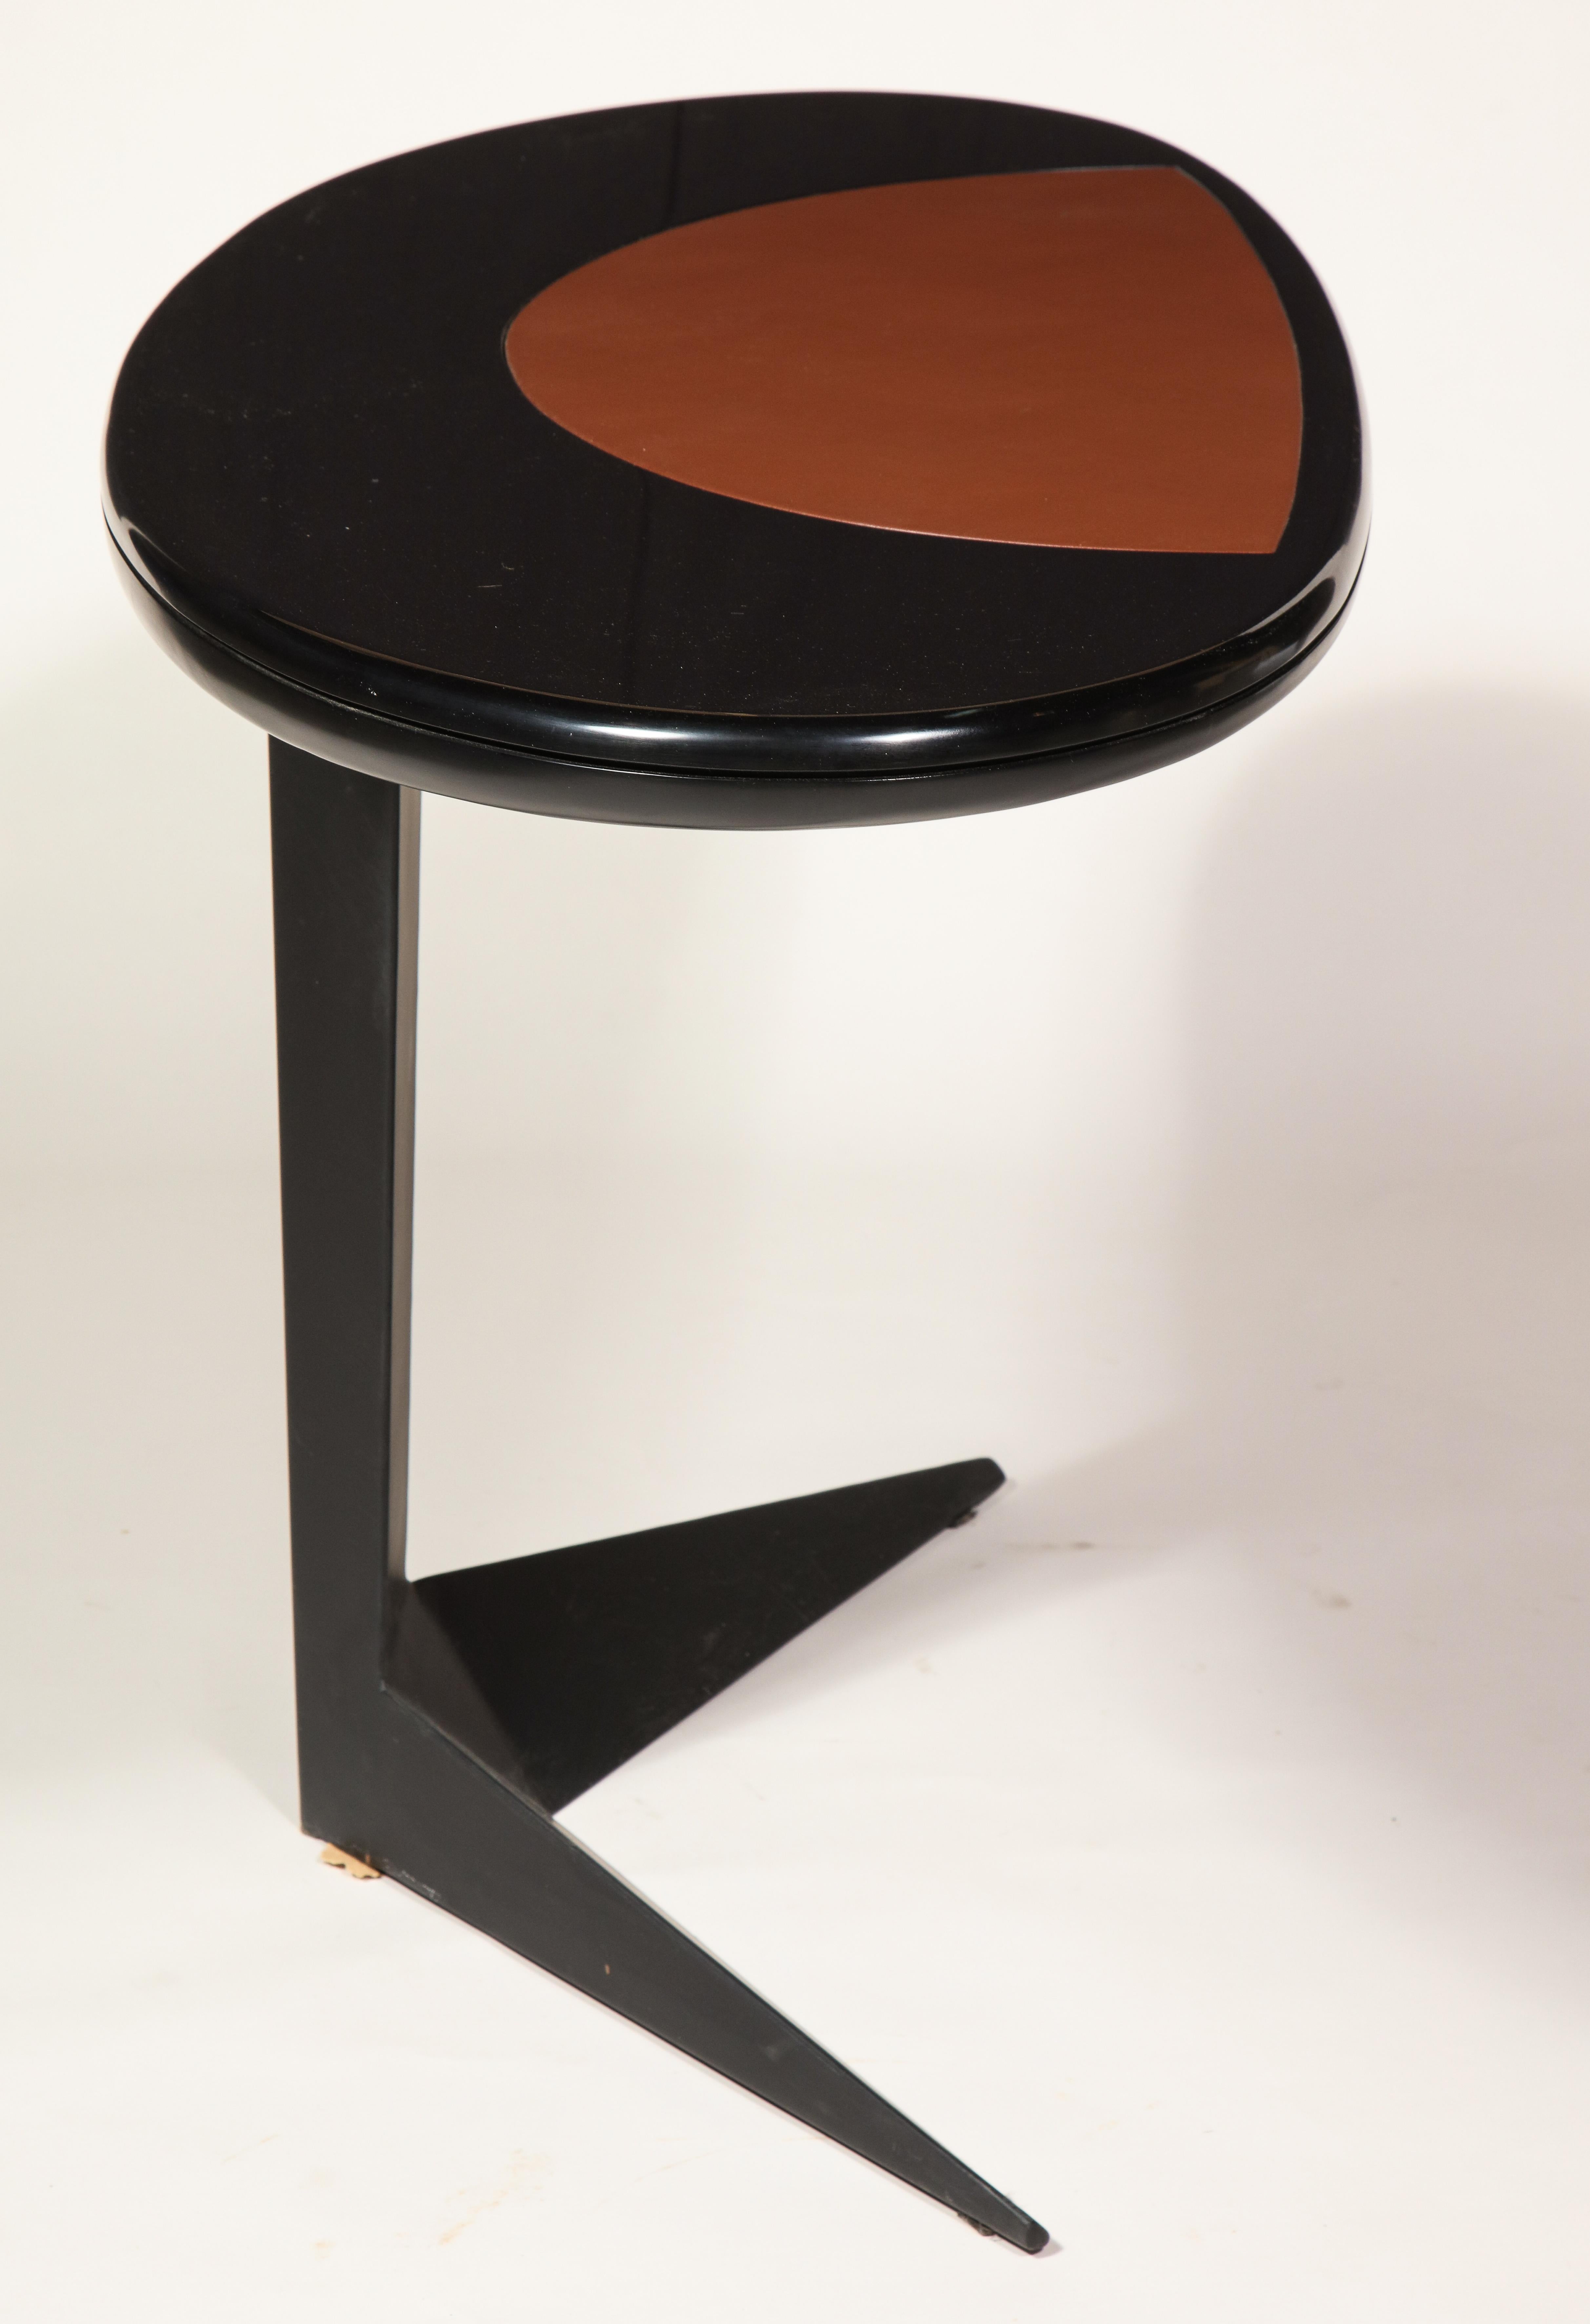 Space Age black brown lacquer steel oval desk console table, France, 1960s

Beautiful desk or entry table with an oval lacquer wood black top with brown leather detail. The lacquer is in very good condition with no chips or cracks visible. The